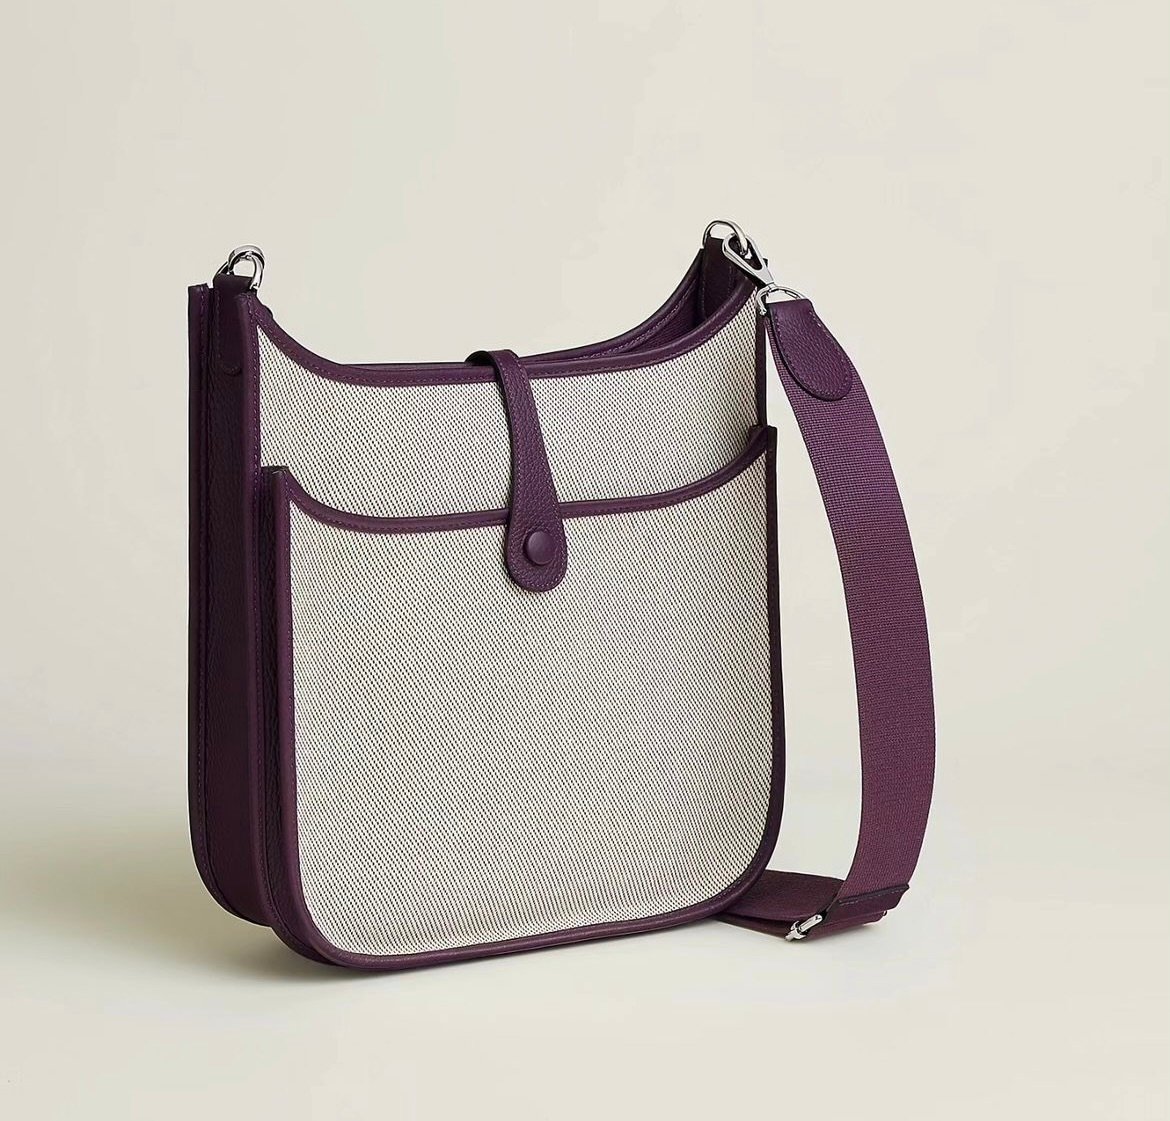 Evelyne 16 'TPM': Likely the most popular non-quota bag as of now. Created  in 1978 as a bag to hold horse grooming tools, this bag didn't reach  mainstream “everyday” use until the